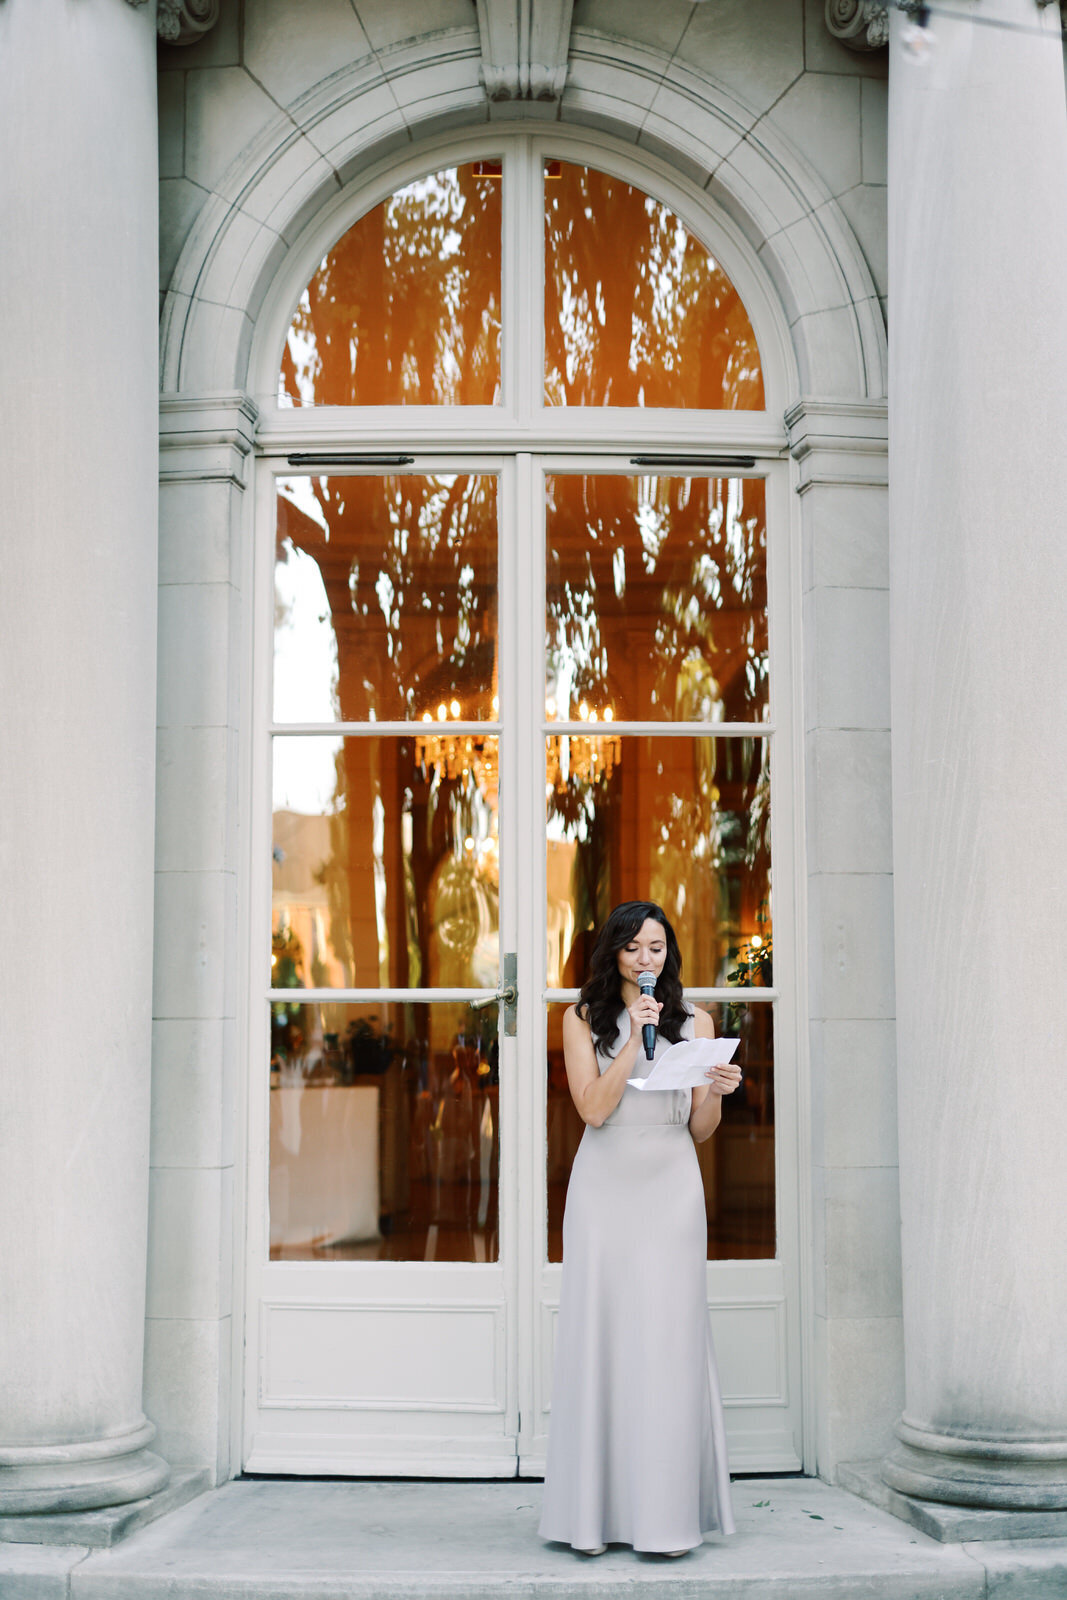 Chic and modern wedding photography at the DC wedding venue, the Meridian House.